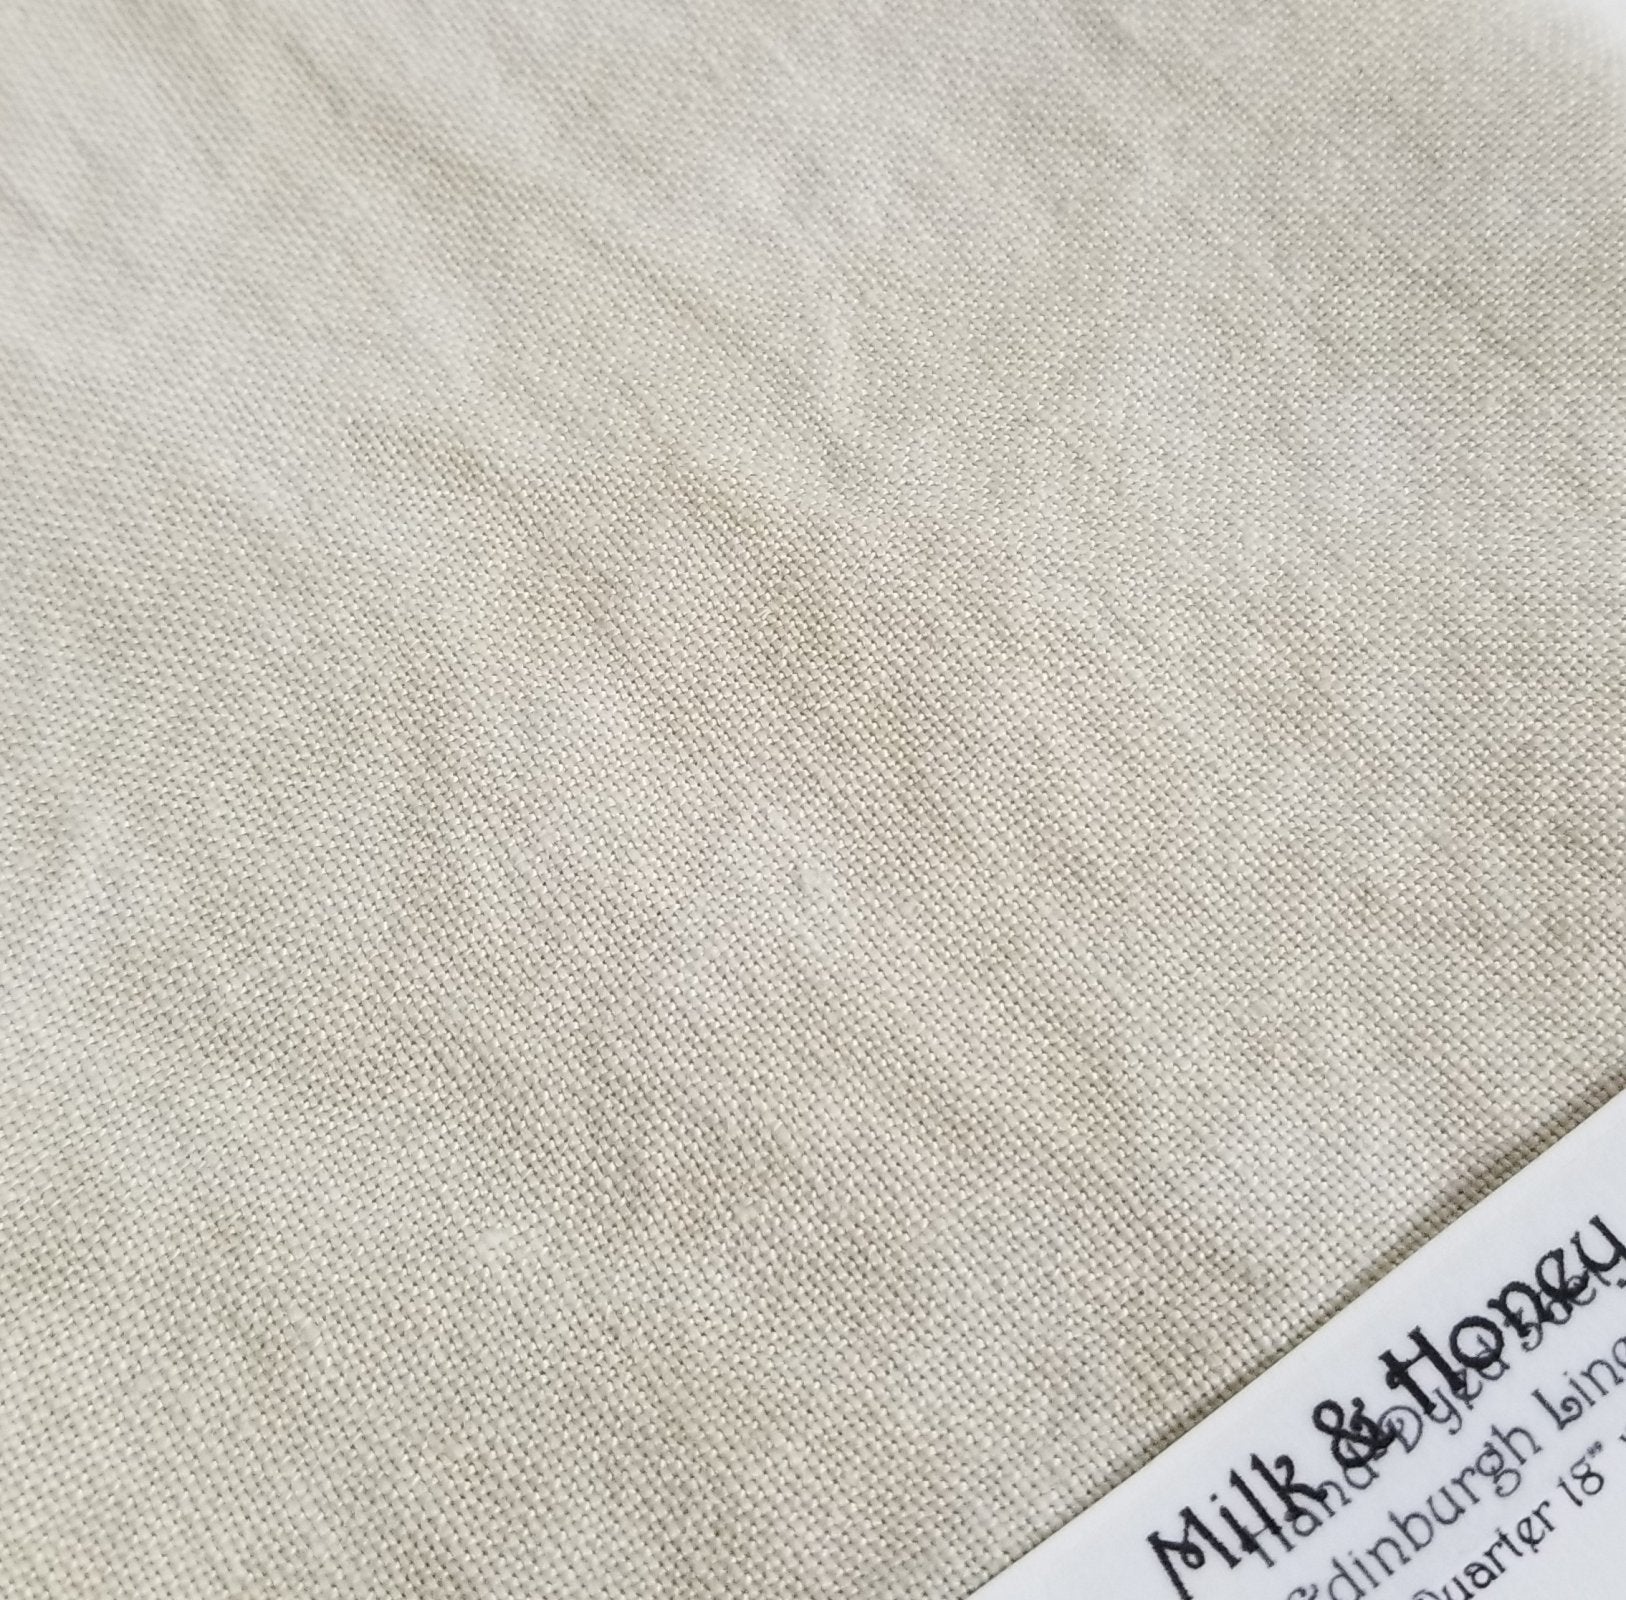 14 Count Aida - Milk and Honey - Fiber on a Whim, Fabric, The Crafty Grimalkin - A Cross Stitch Store